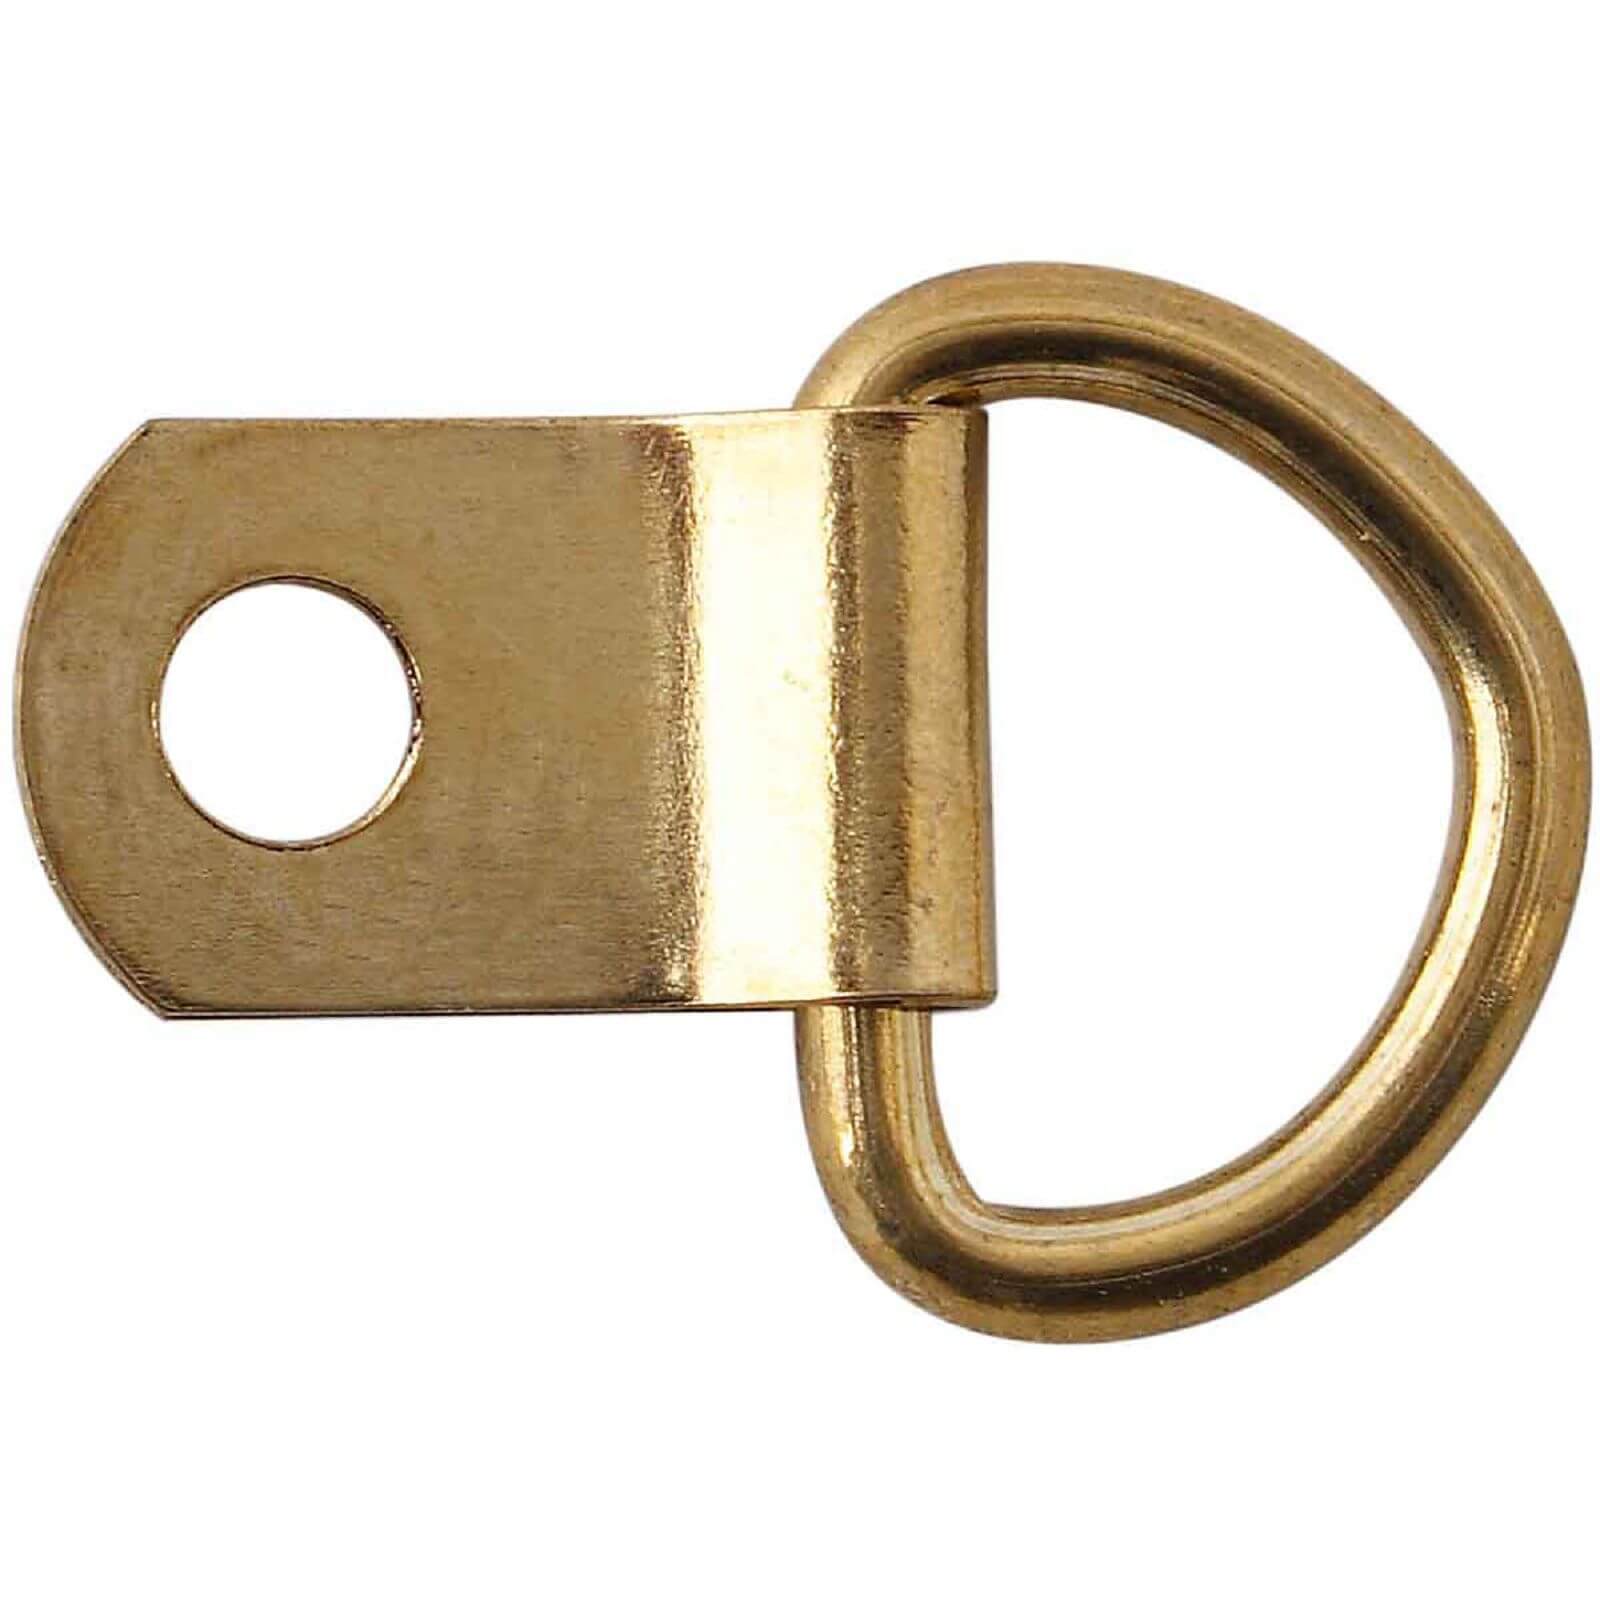 Medium Brass Picture Ring & Plate - 2 Pack